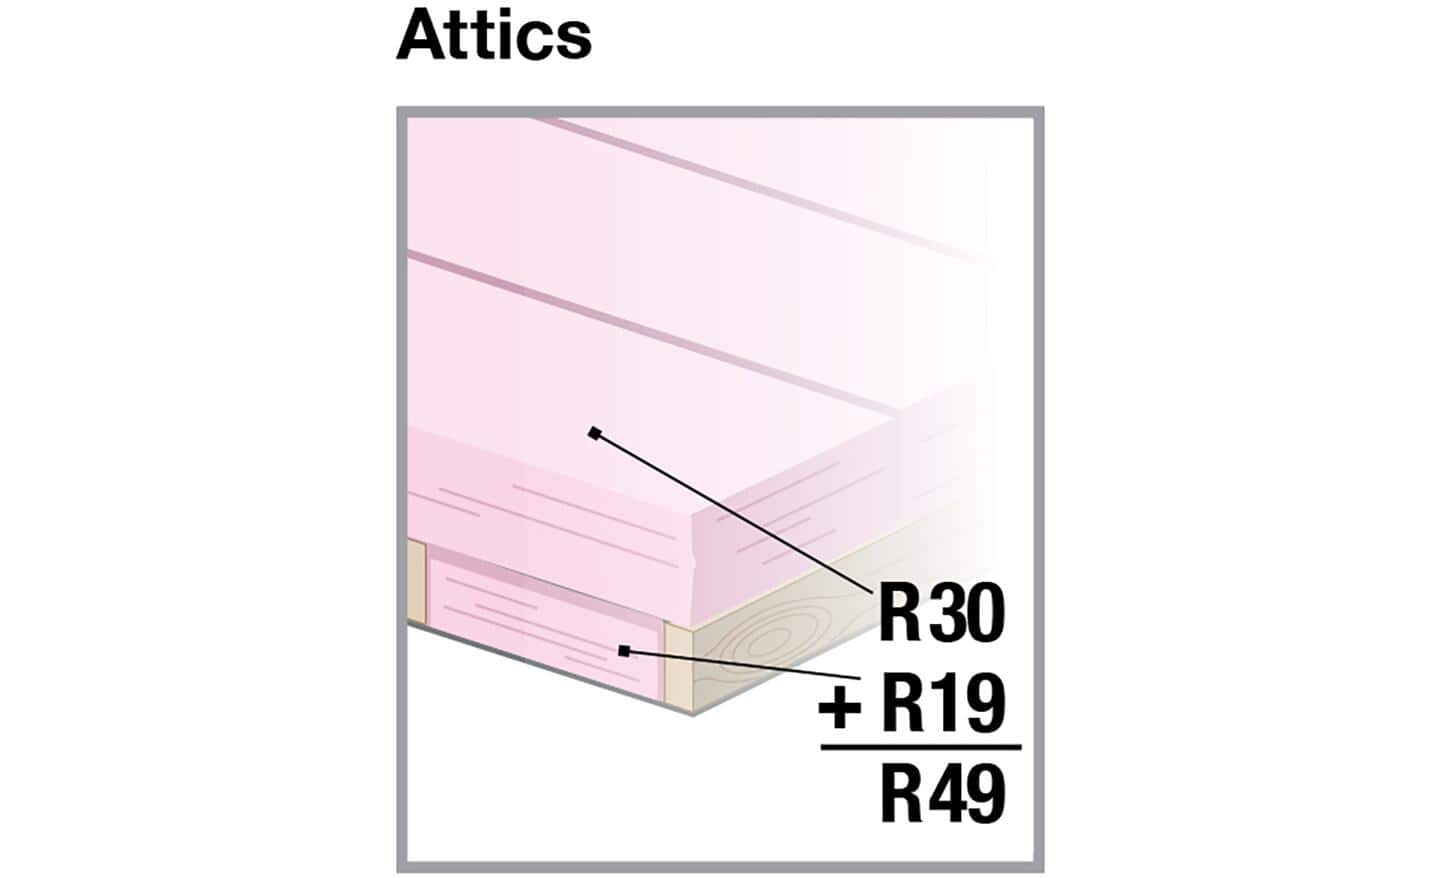 Combined R-values for extra attic insulation.